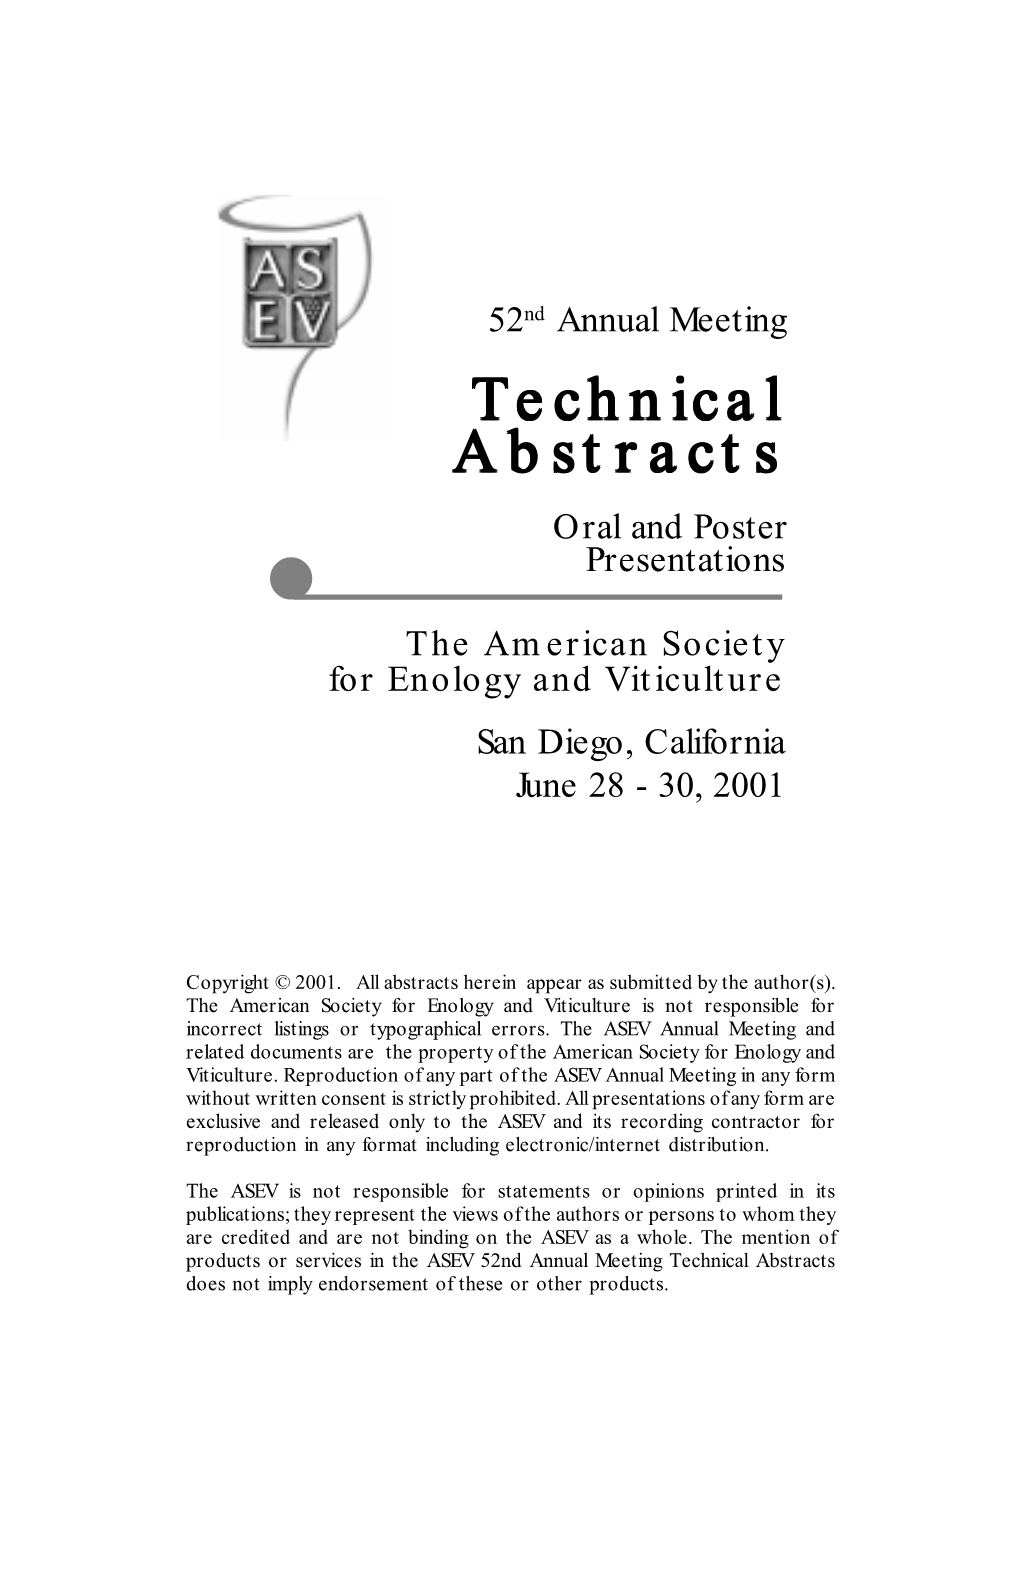 Download Abstracts